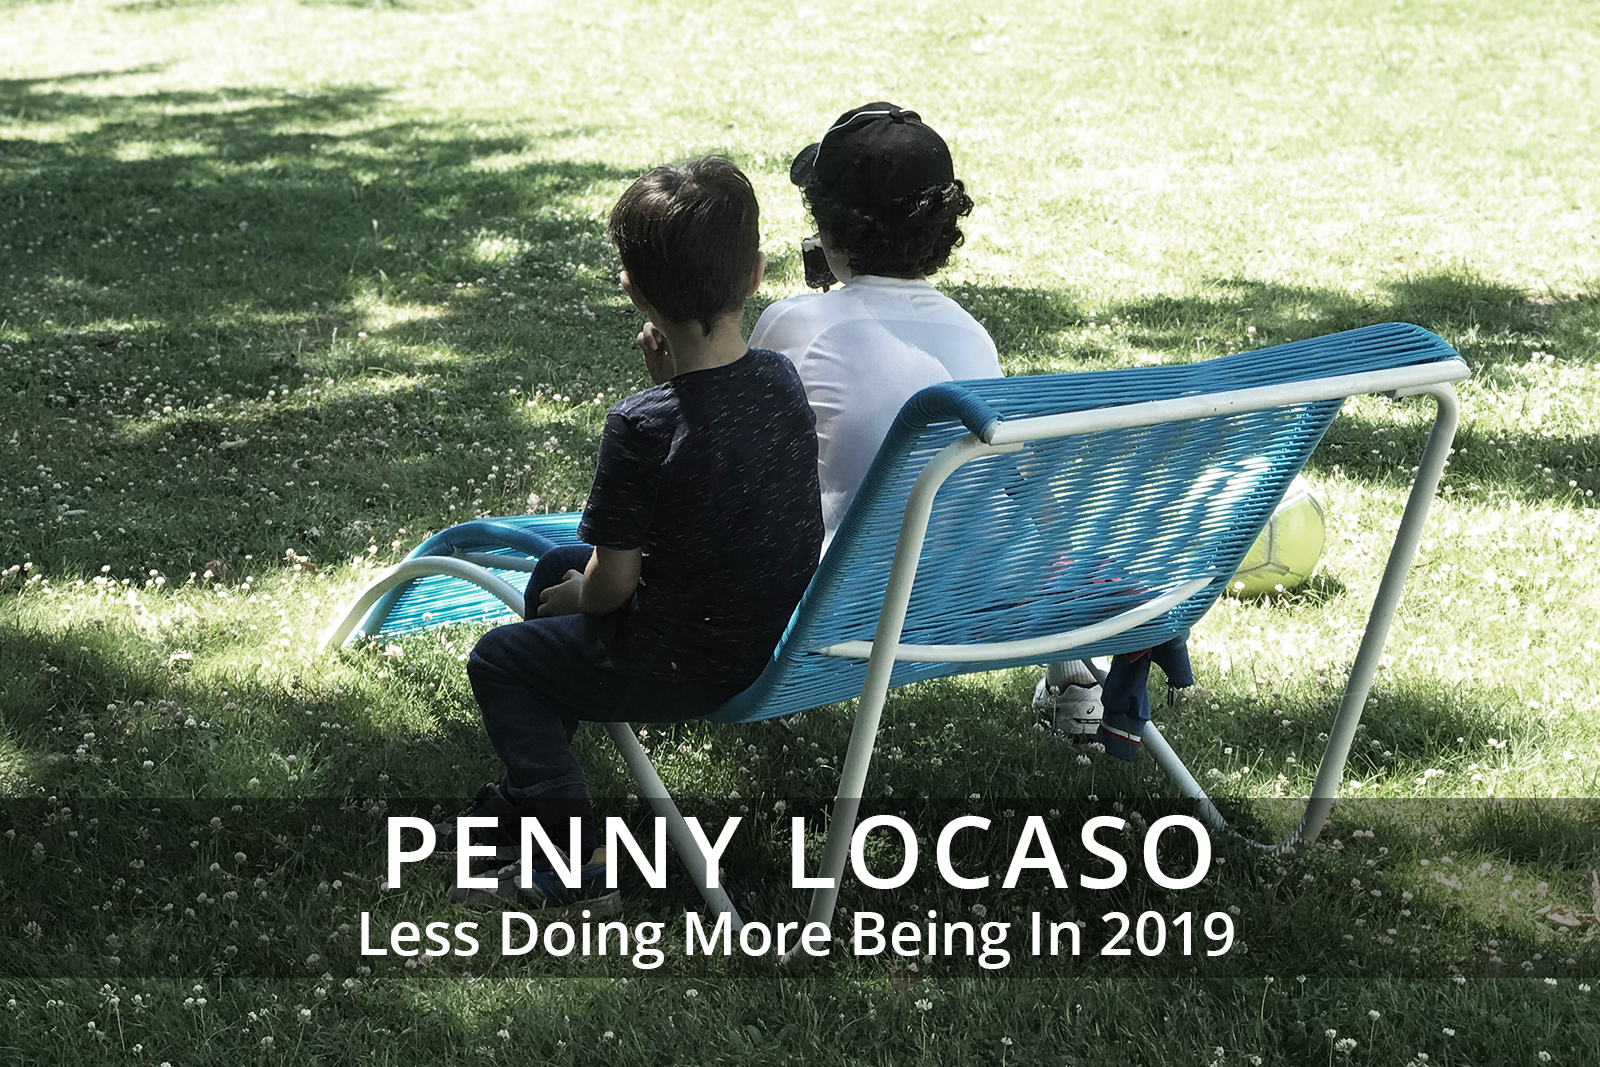 Less Doing More Being In 2019 | Episode 13